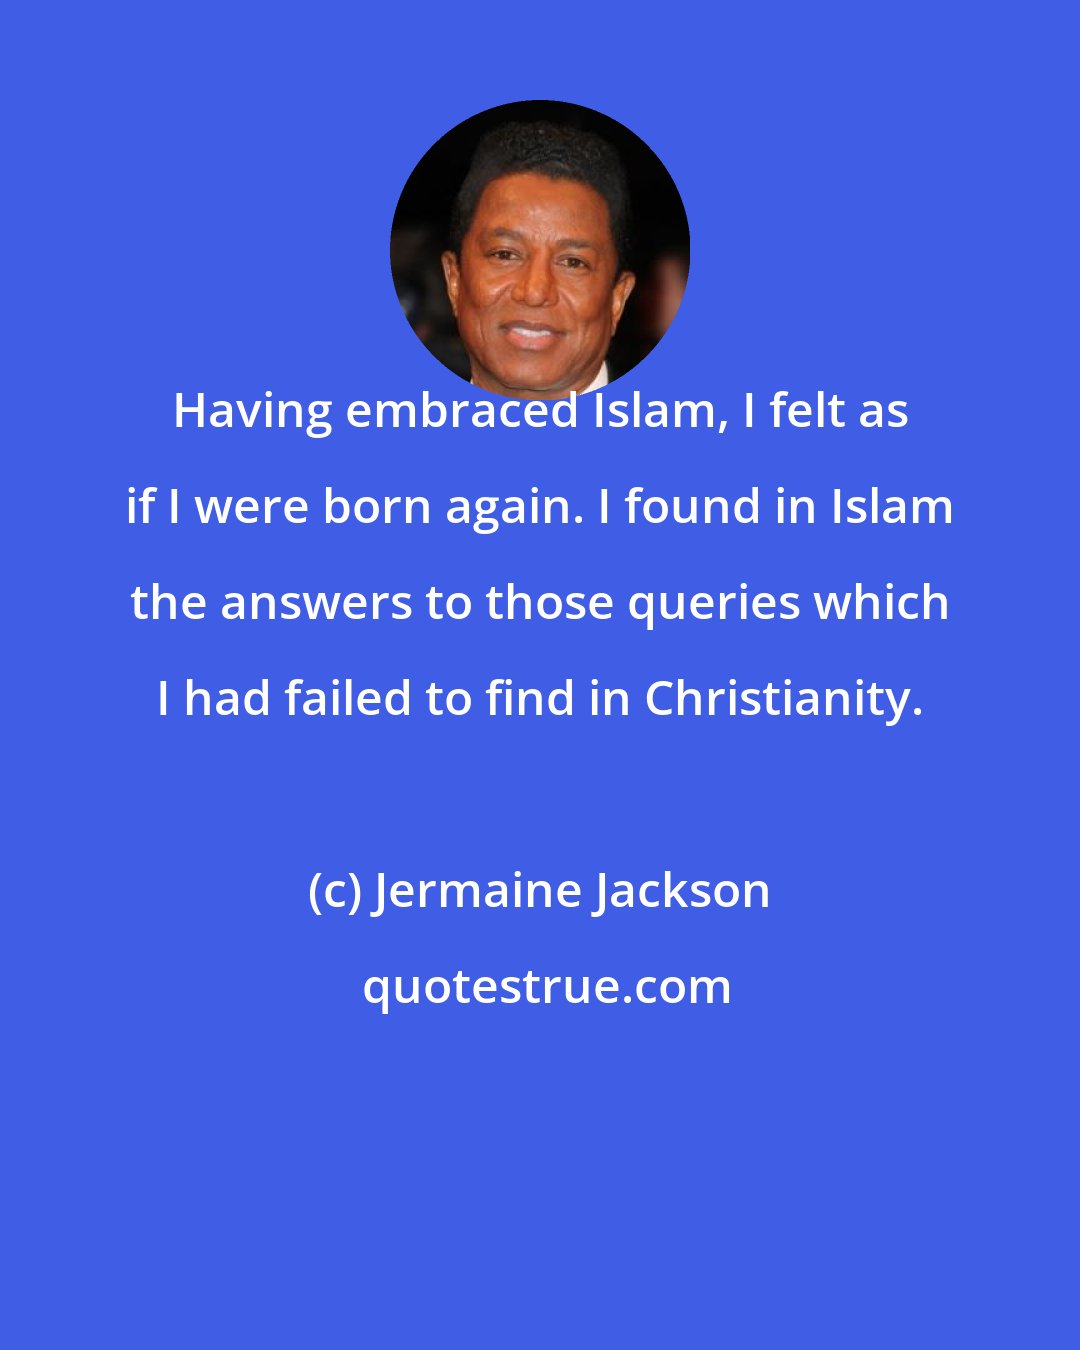 Jermaine Jackson: Having embraced Islam, I felt as if I were born again. I found in Islam the answers to those queries which I had failed to find in Christianity.